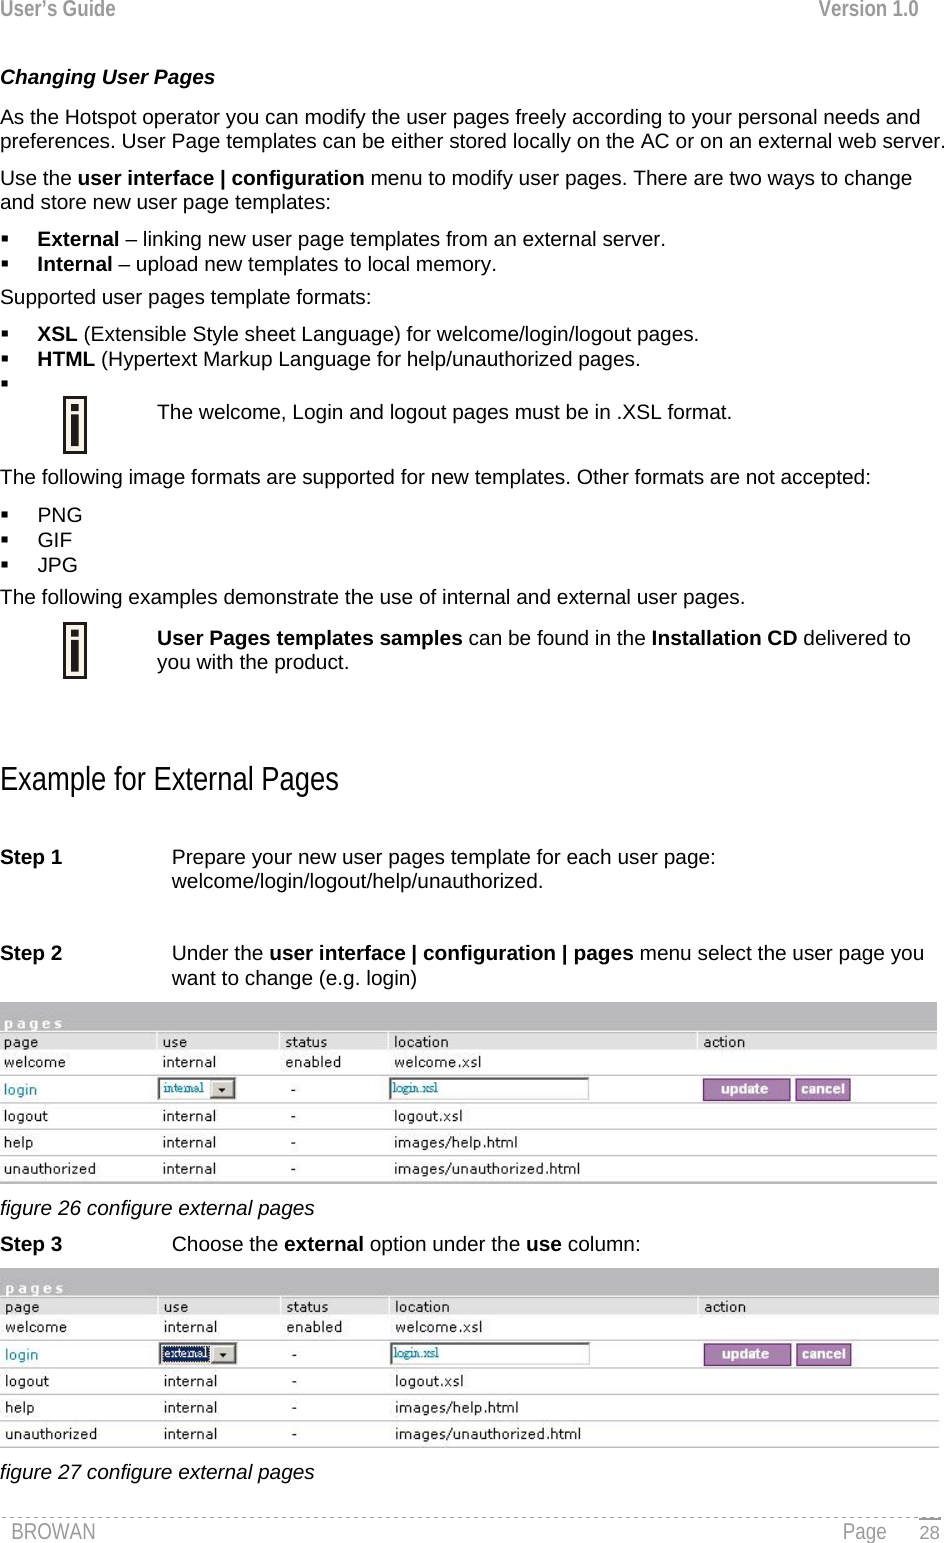 User’s Guide  Version 1.0  Changing User Pages As the Hotspot operator you can modify the user pages freely according to your personal needs and preferences. User Page templates can be either stored locally on the AC or on an external web server.  Use the user interface | configuration menu to modify user pages. There are two ways to change and store new user page templates:  External – linking new user page templates from an external server.  Internal – upload new templates to local memory. Supported user pages template formats:  XSL (Extensible Style sheet Language) for welcome/login/logout pages.  HTML (Hypertext Markup Language for help/unauthorized pages.    The welcome, Login and logout pages must be in .XSL format. The following image formats are supported for new templates. Other formats are not accepted:  PNG  GIF  JPG  The following examples demonstrate the use of internal and external user pages.  User Pages templates samples can be found in the Installation CD delivered to you with the product.   Example for External Pages  Step 1  Prepare your new user pages template for each user page: welcome/login/logout/help/unauthorized.   Step 2  Under the user interface | configuration | pages menu select the user page you want to change (e.g. login)  figure 26 configure external pages Step 3  Choose the external option under the use column:  figure 27 configure external pages BROWAN                                                                                                                                               Page   28